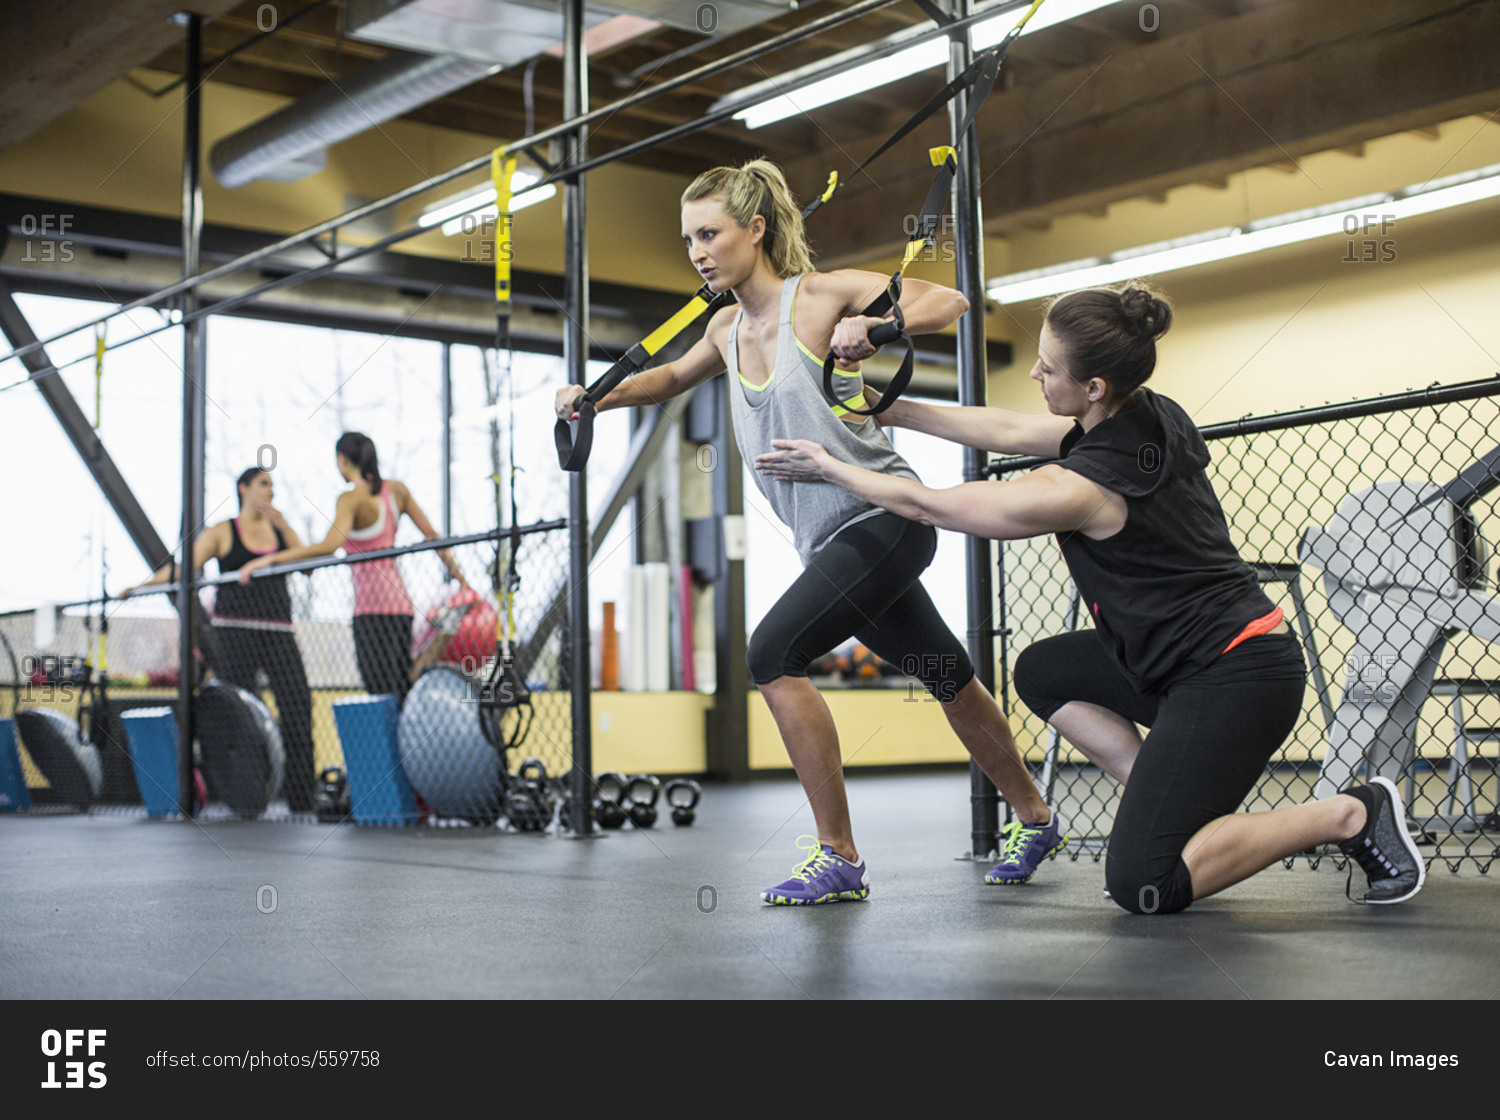 Instructor assisting woman in pulling resistance bands at health club